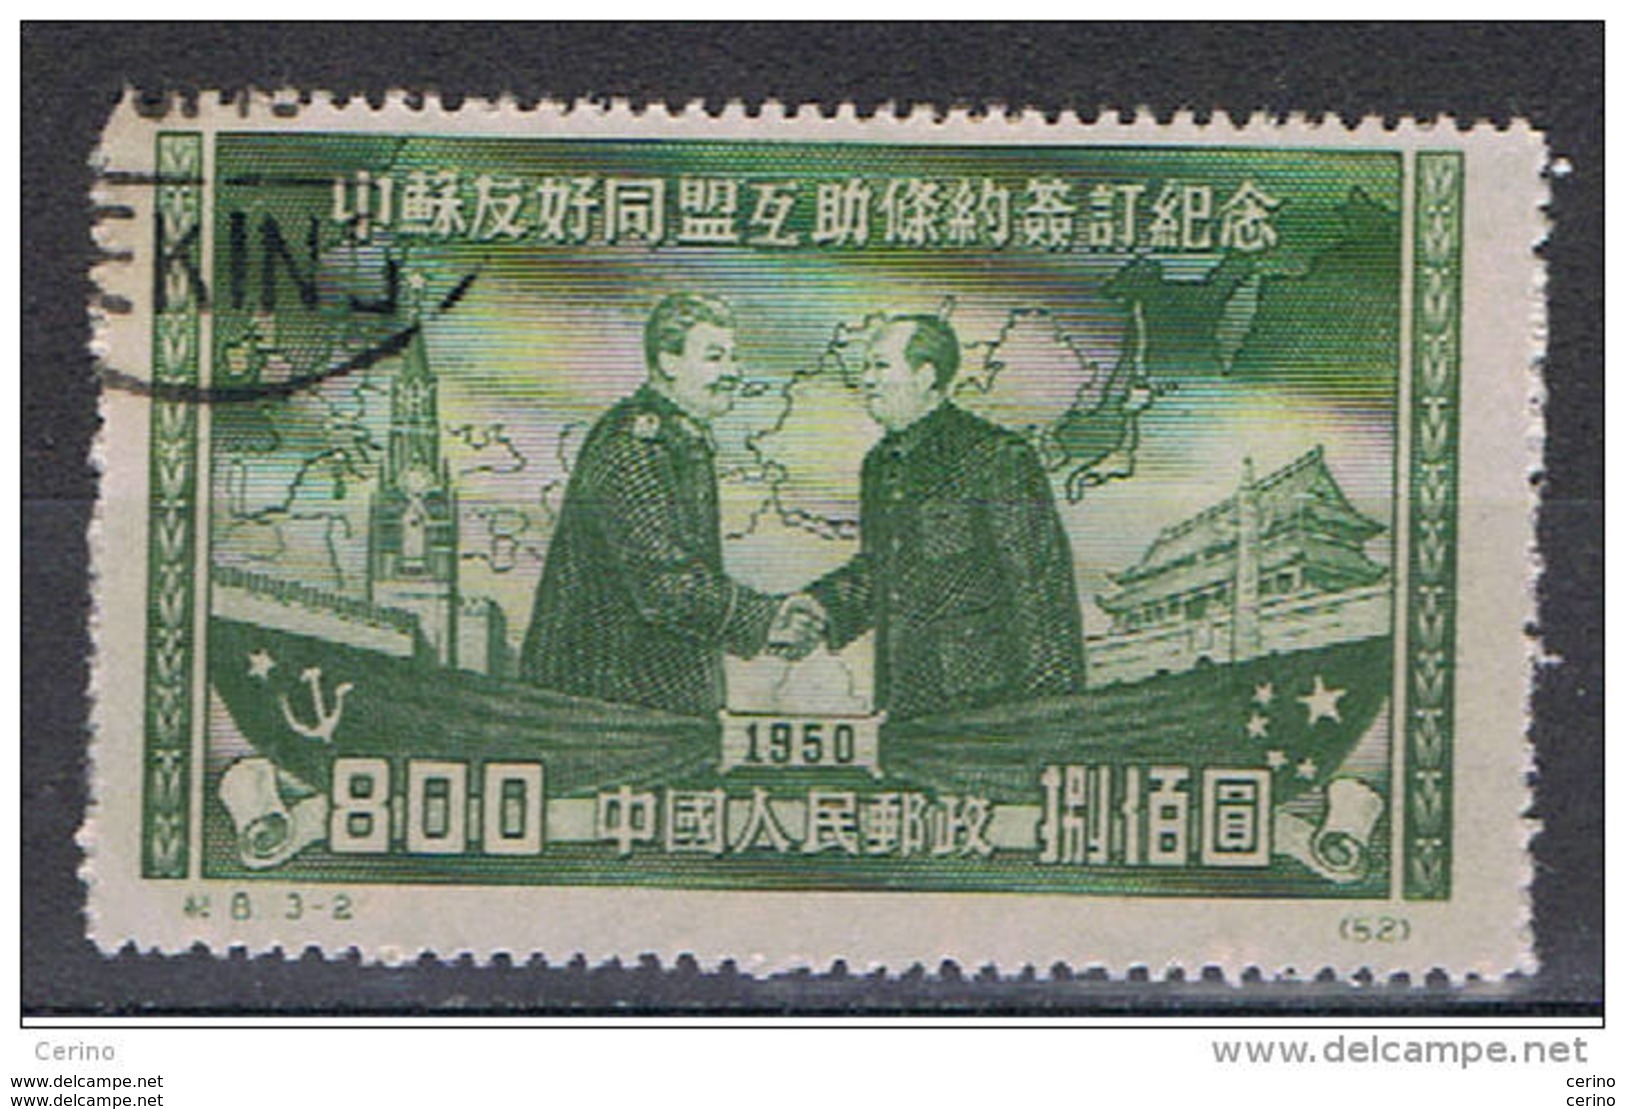 CHINA:  1950  OFFICIAL  REPRINTS  -  800 $. USED  STAMP  -  YV/TELL. 867 - Ristampe Ufficiali